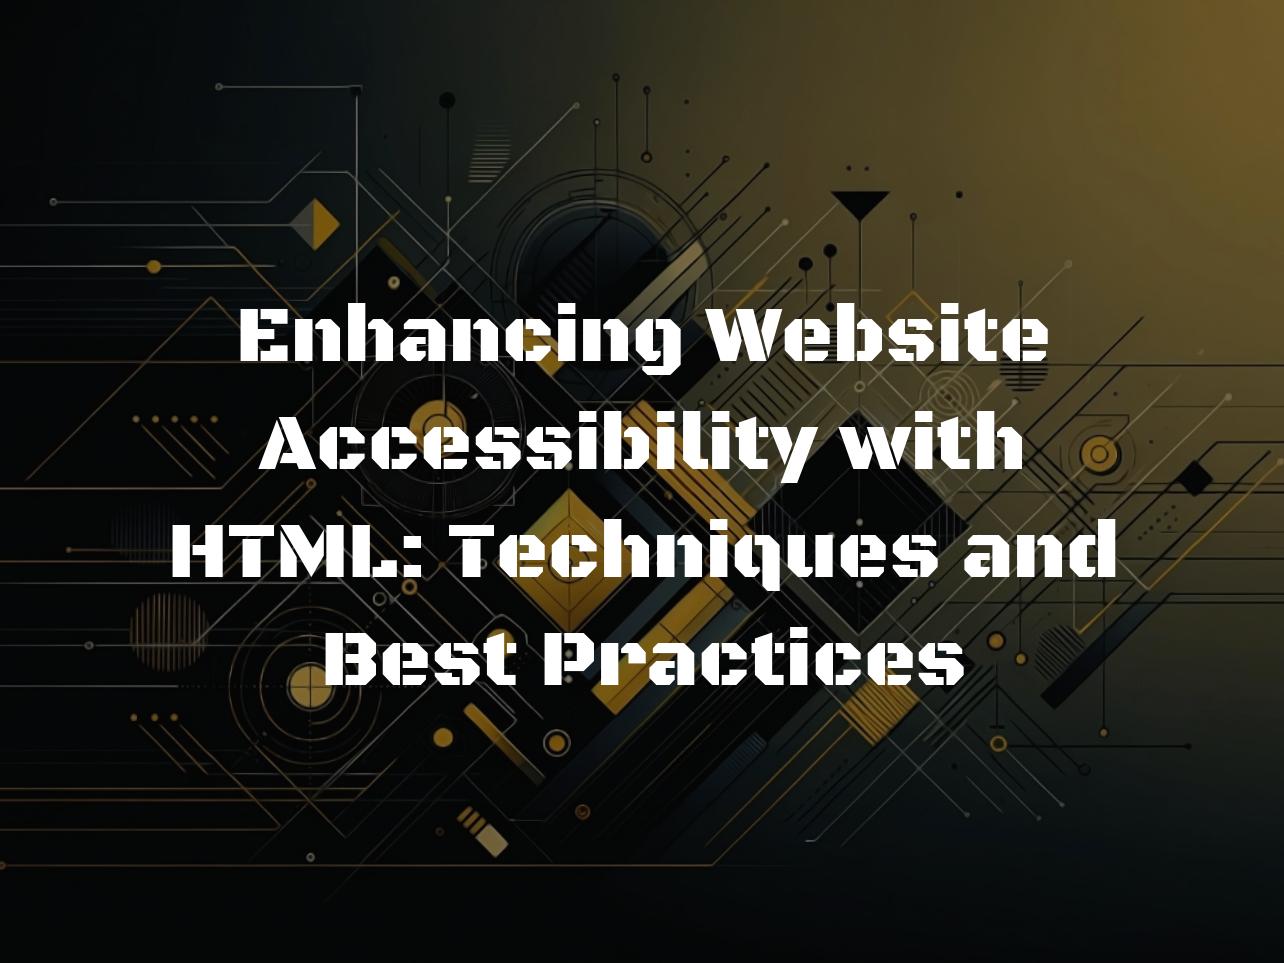 Enhancing Website Accessibility with HTML: Techniques and Best Practices